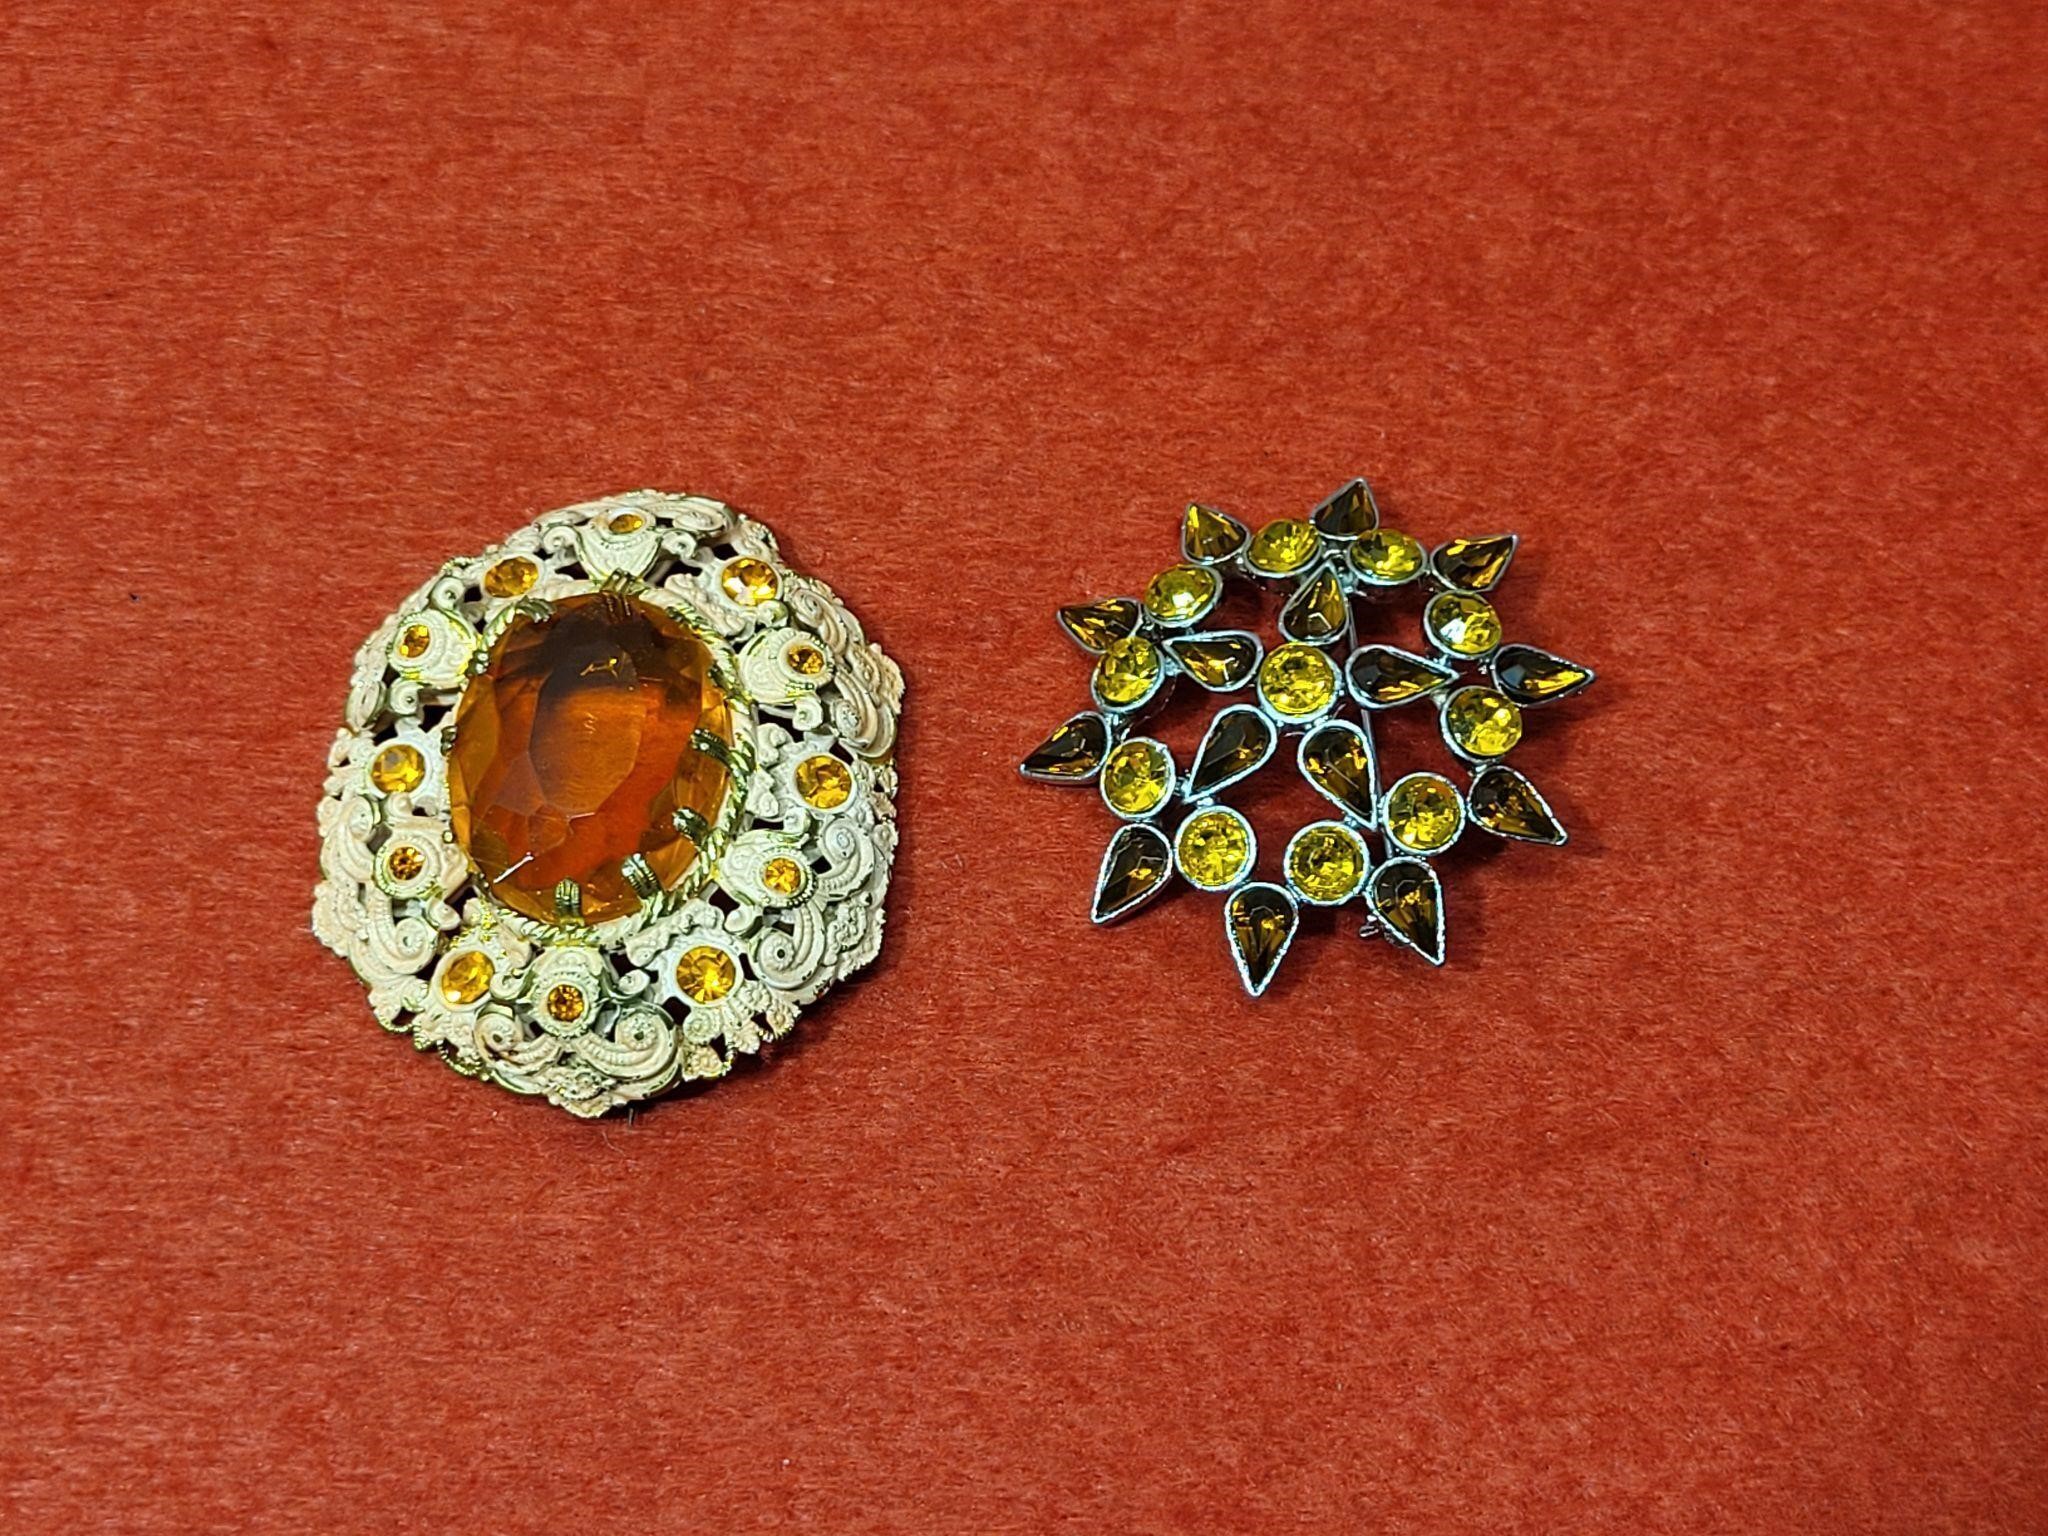 Vtg Brooches Orange one from Germany (needs work)